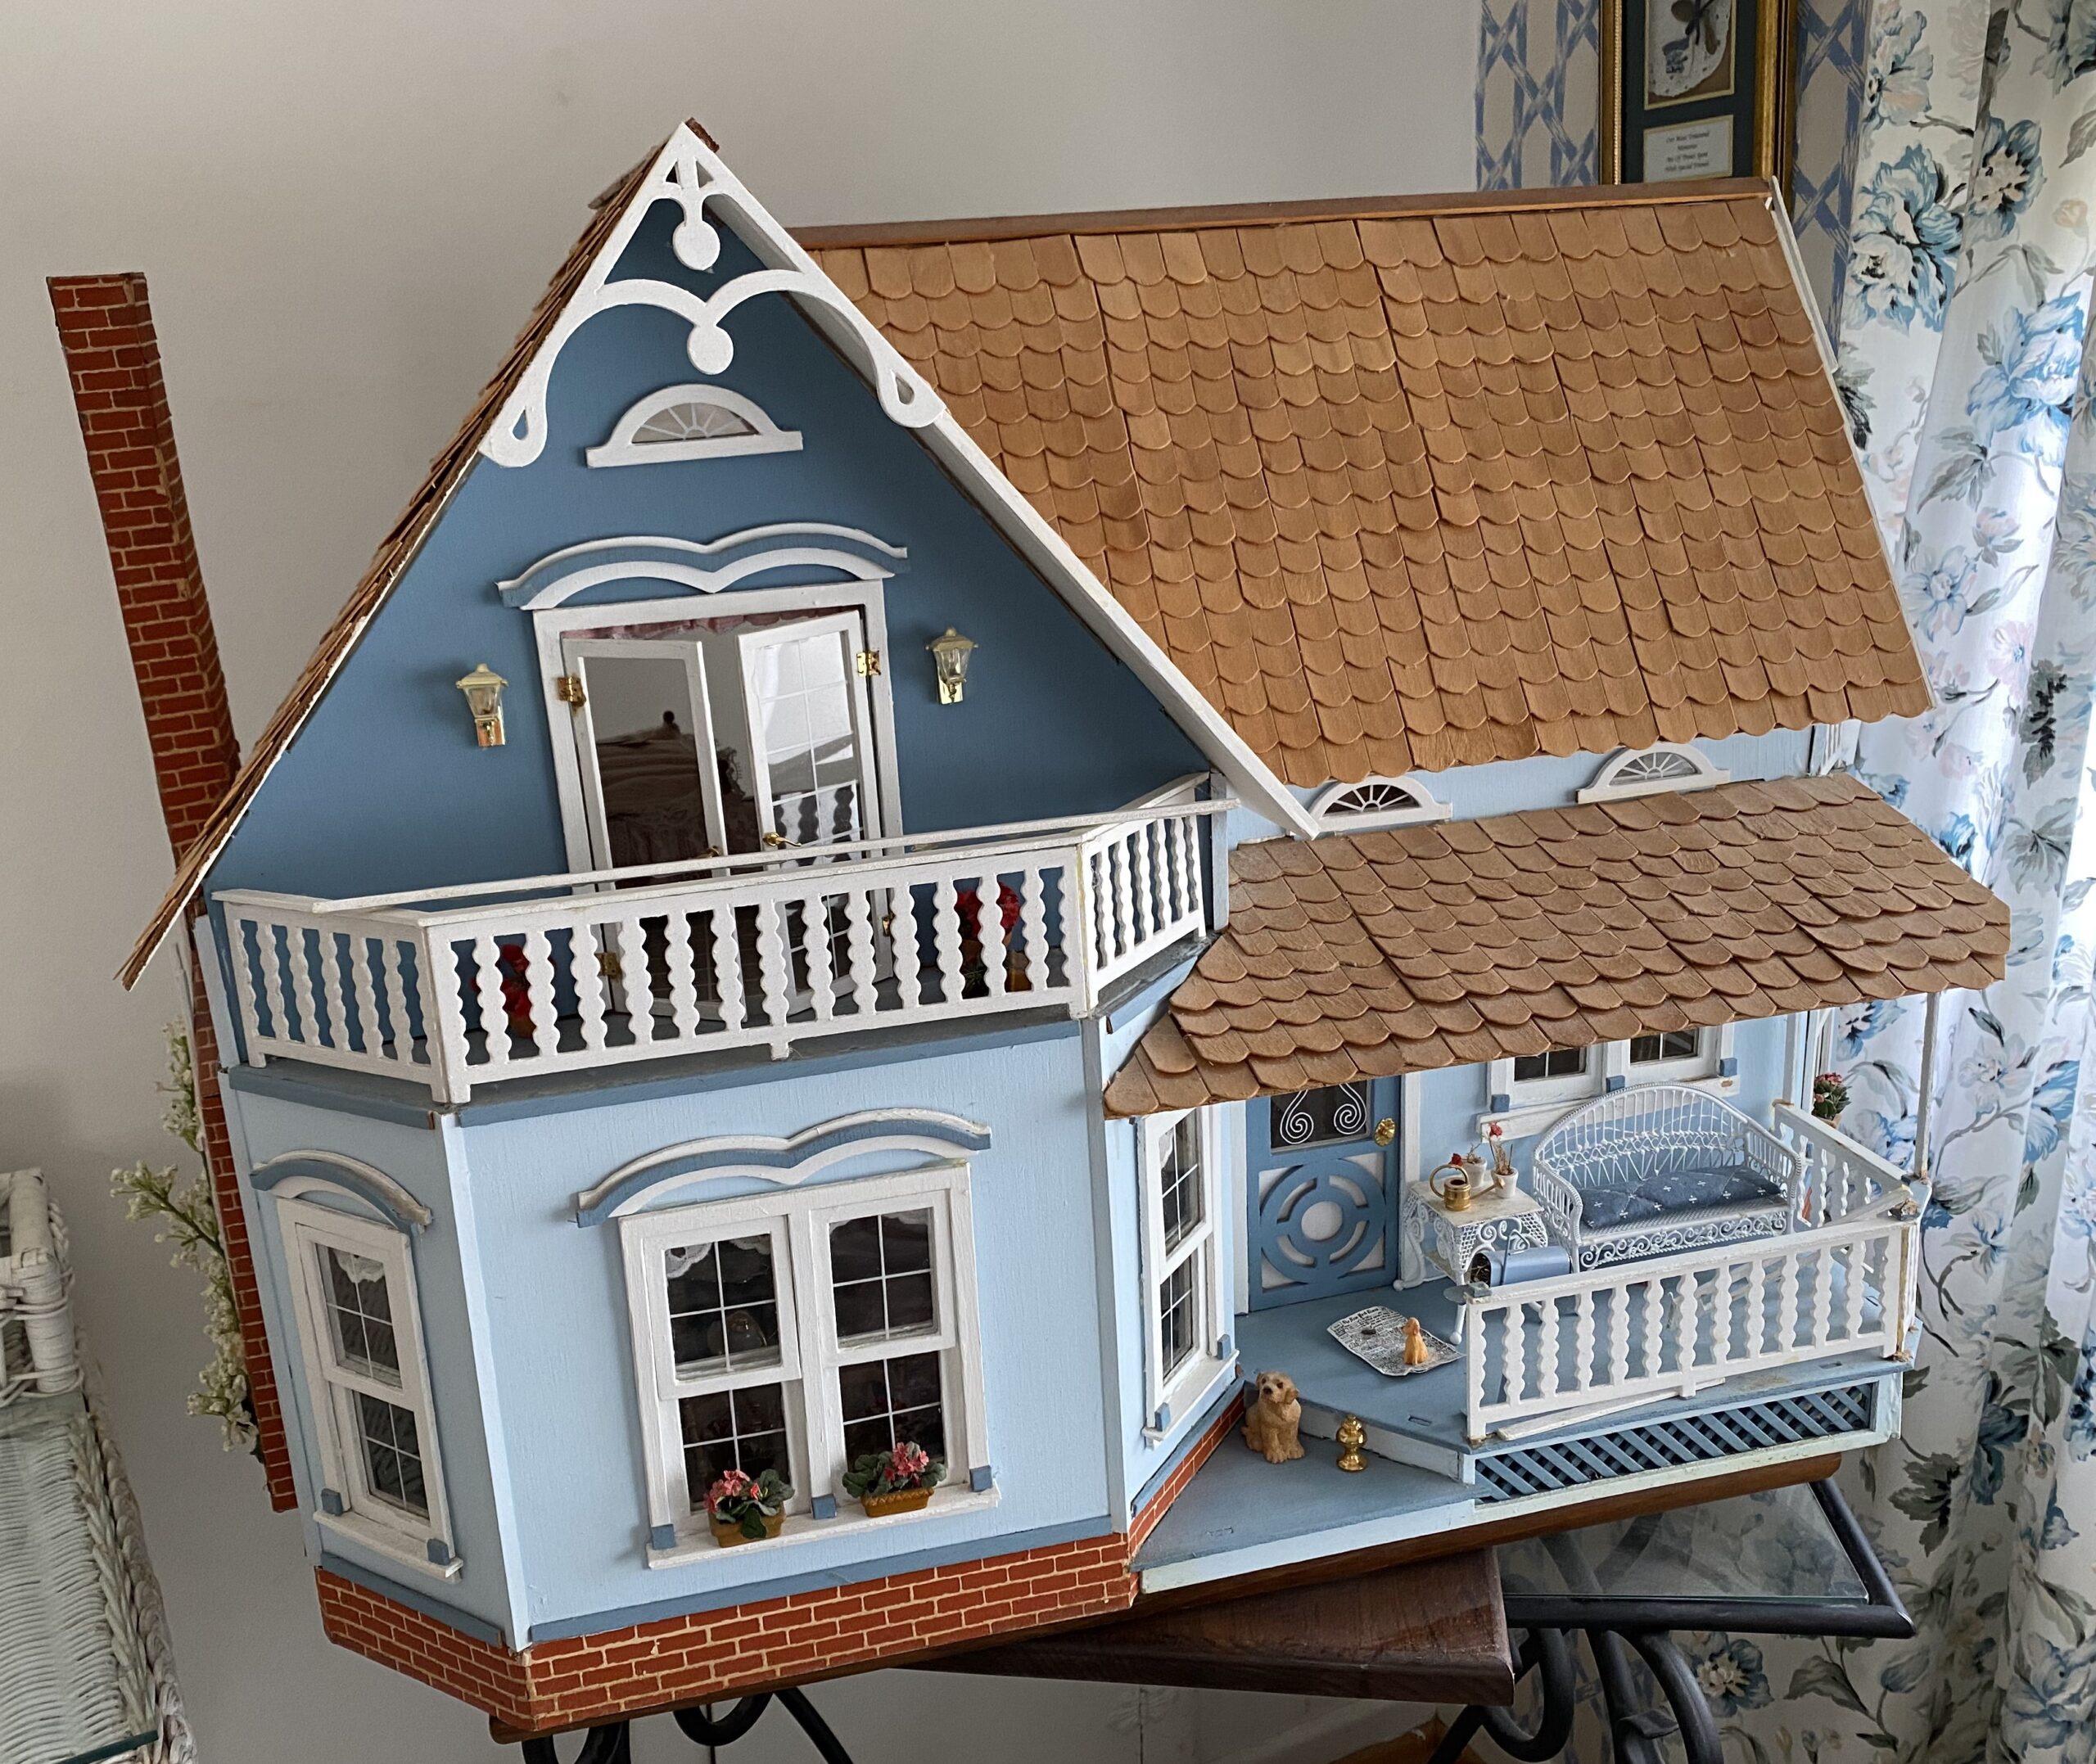 YES Paste On Clearance - General Mini Talk - The Greenleaf Miniature  Community